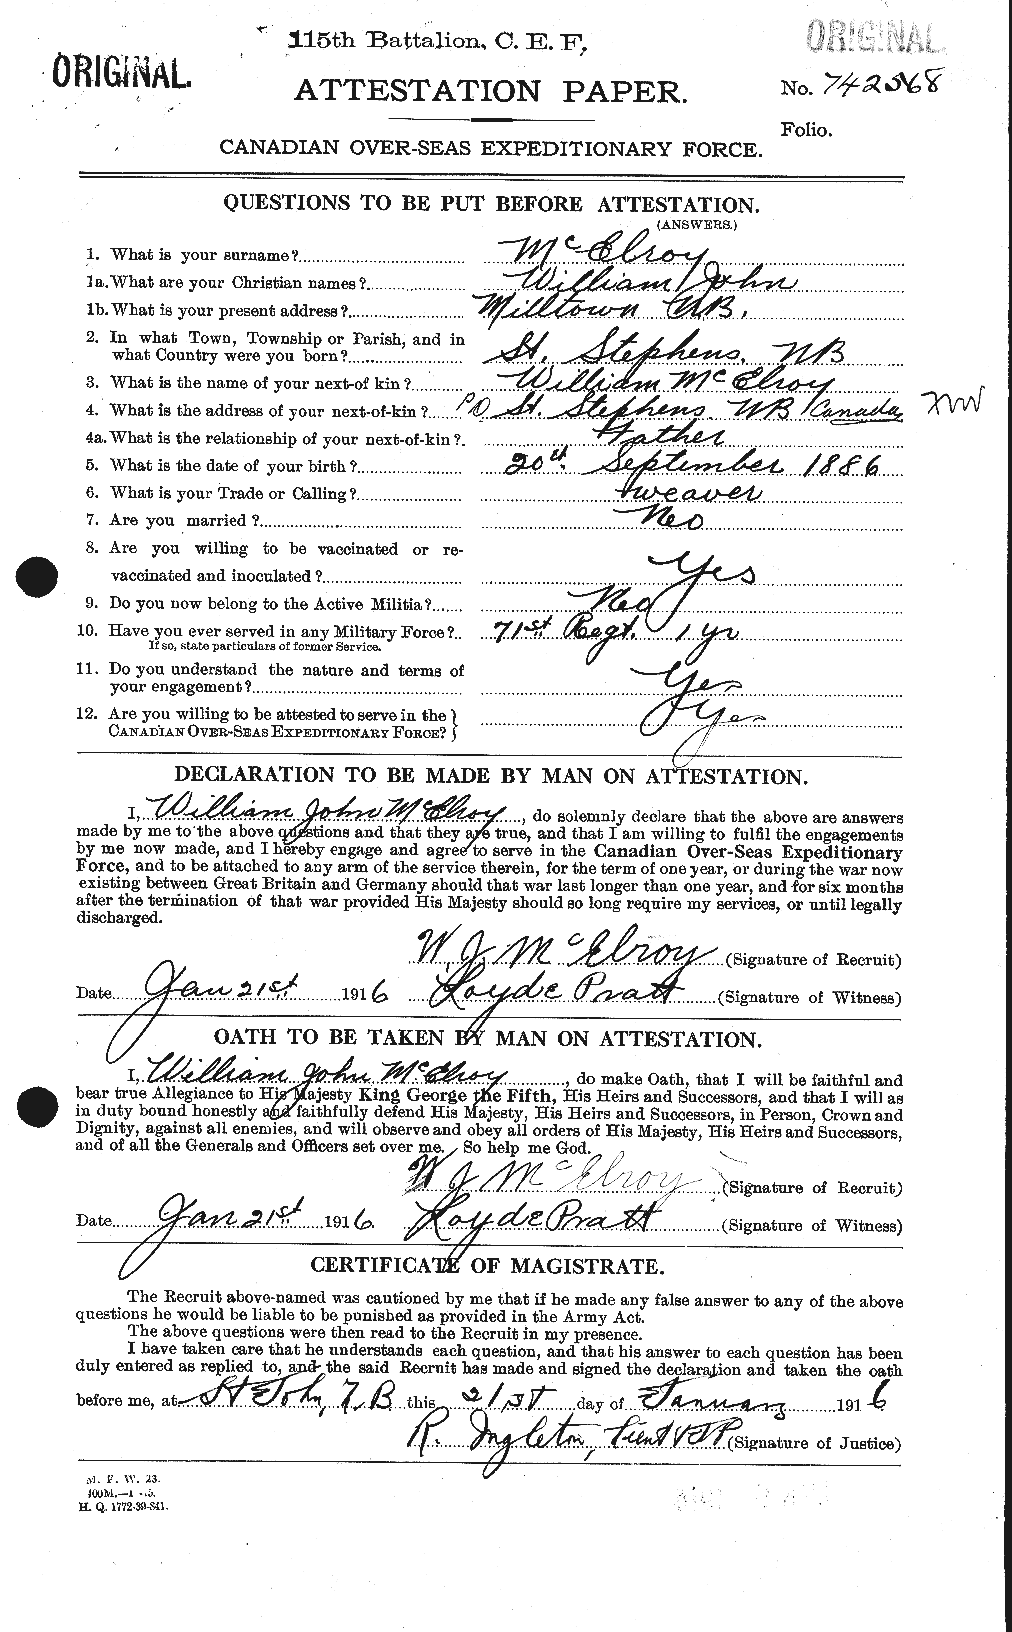 Personnel Records of the First World War - CEF 522093a